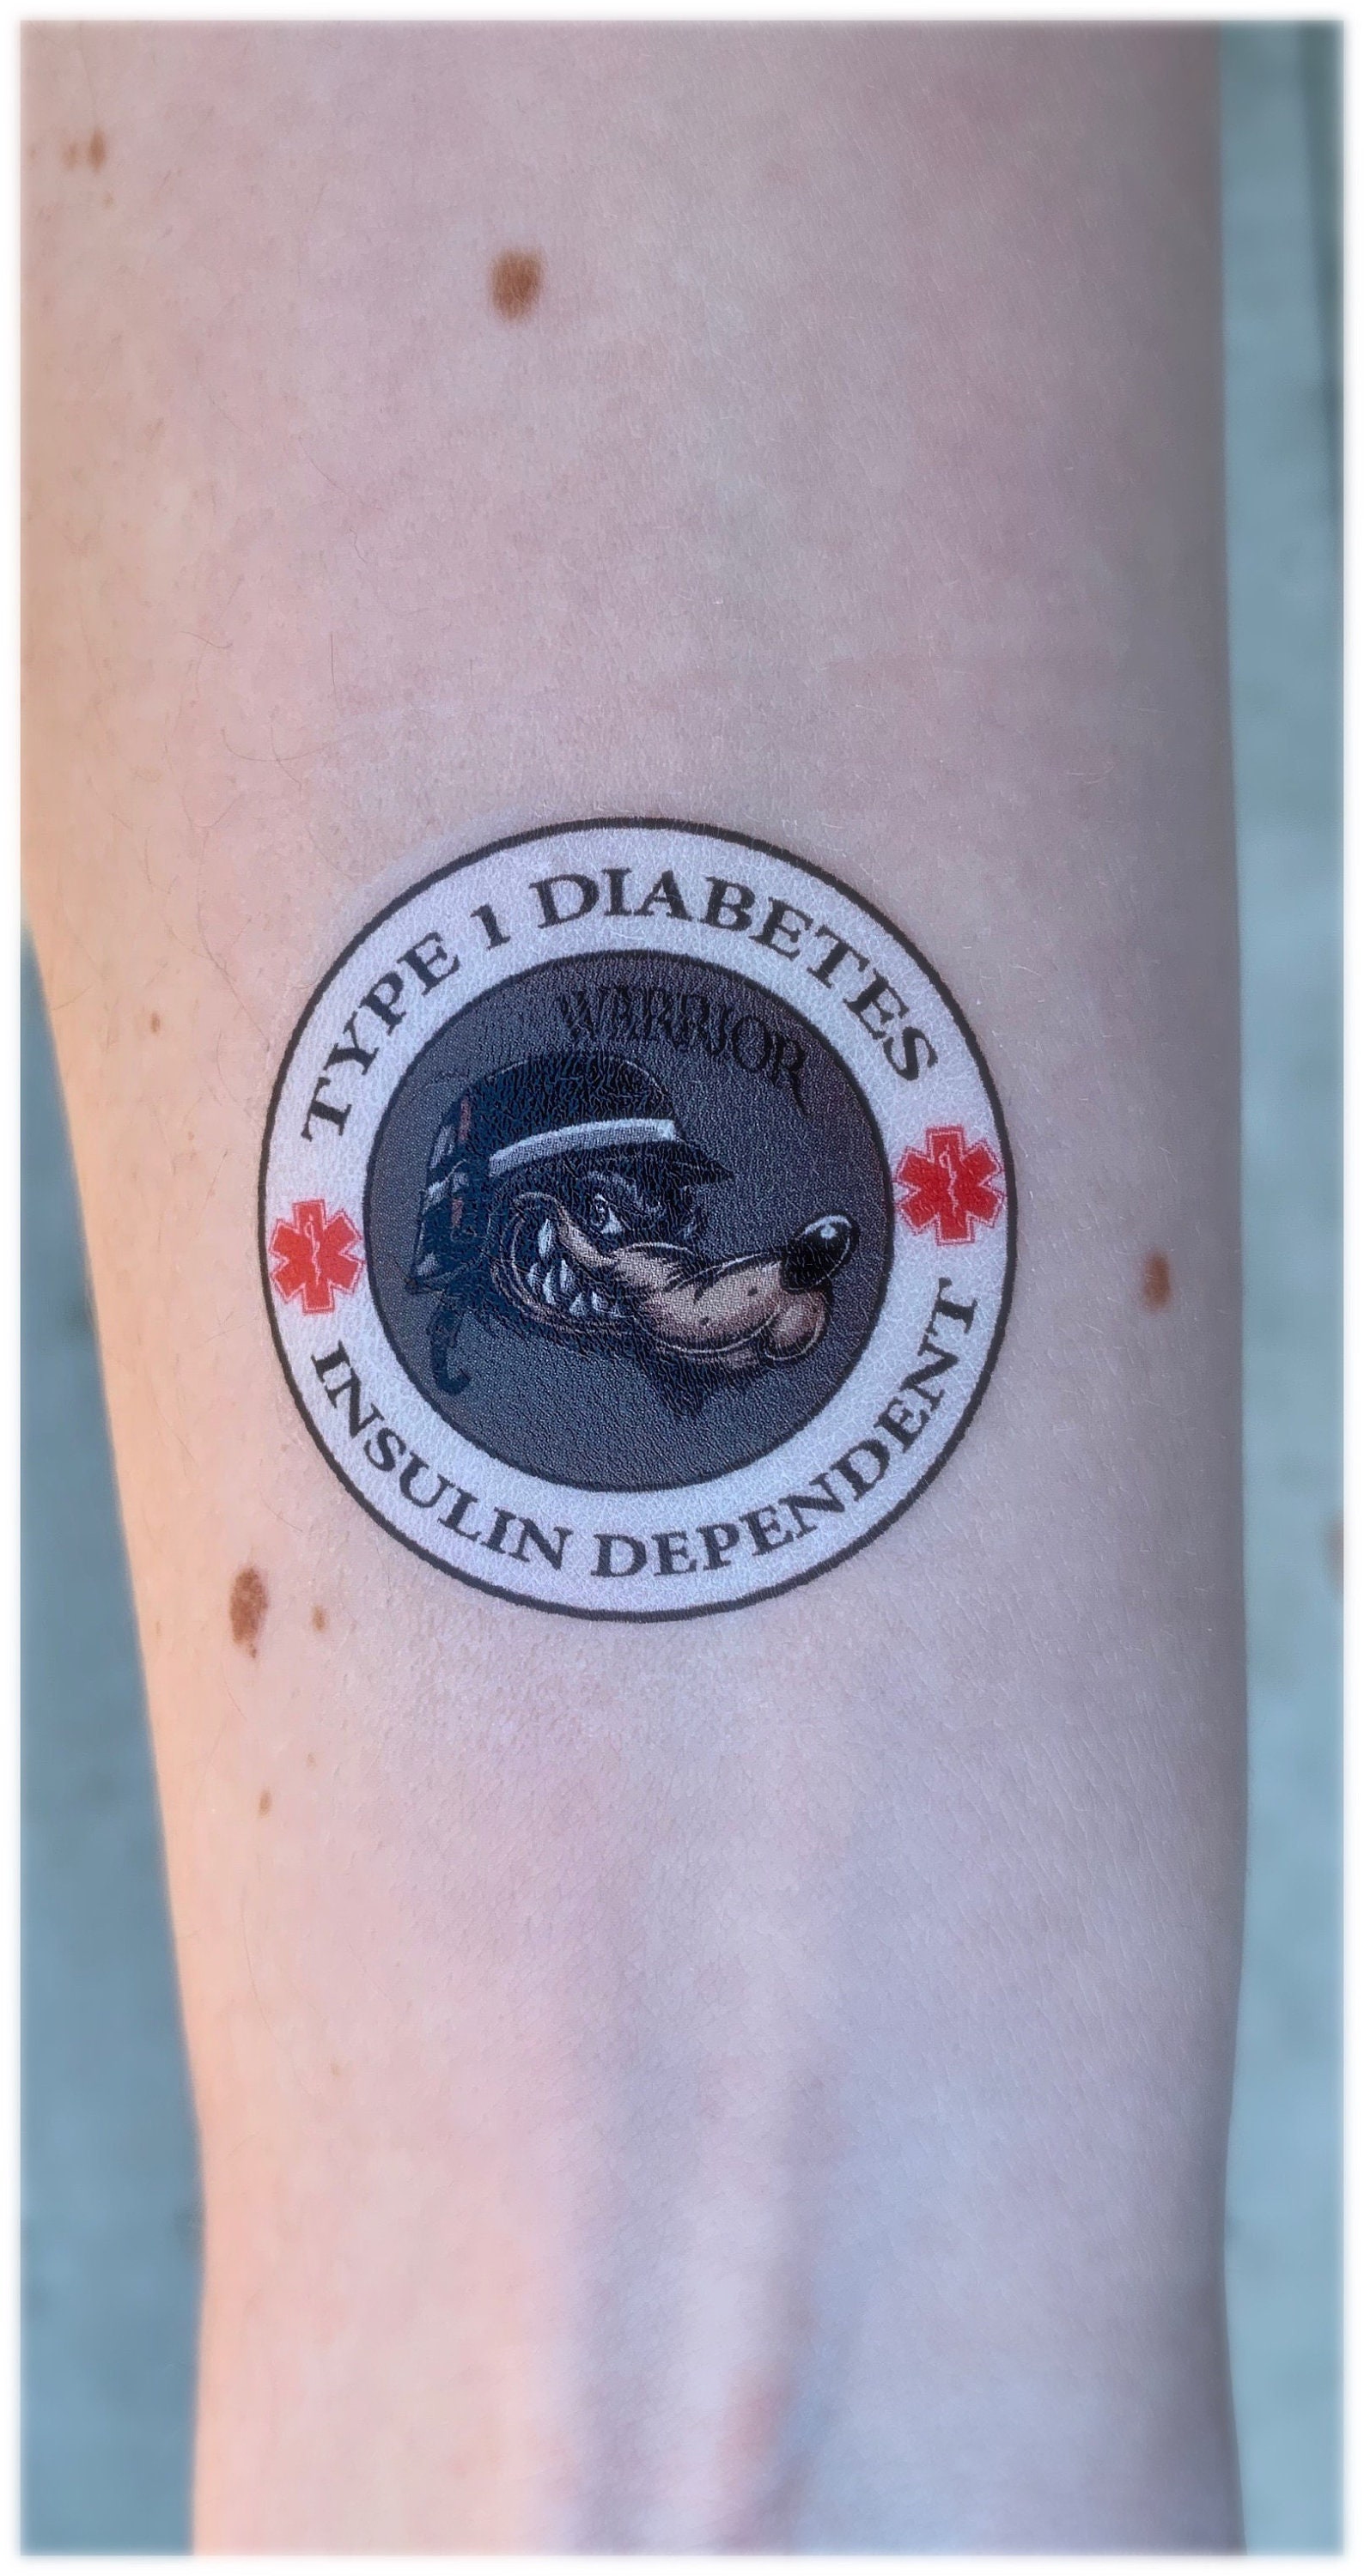 Tattoo uploaded by Hayden Tully  First tattoo ever Type 1 diabetic   Tattoodo